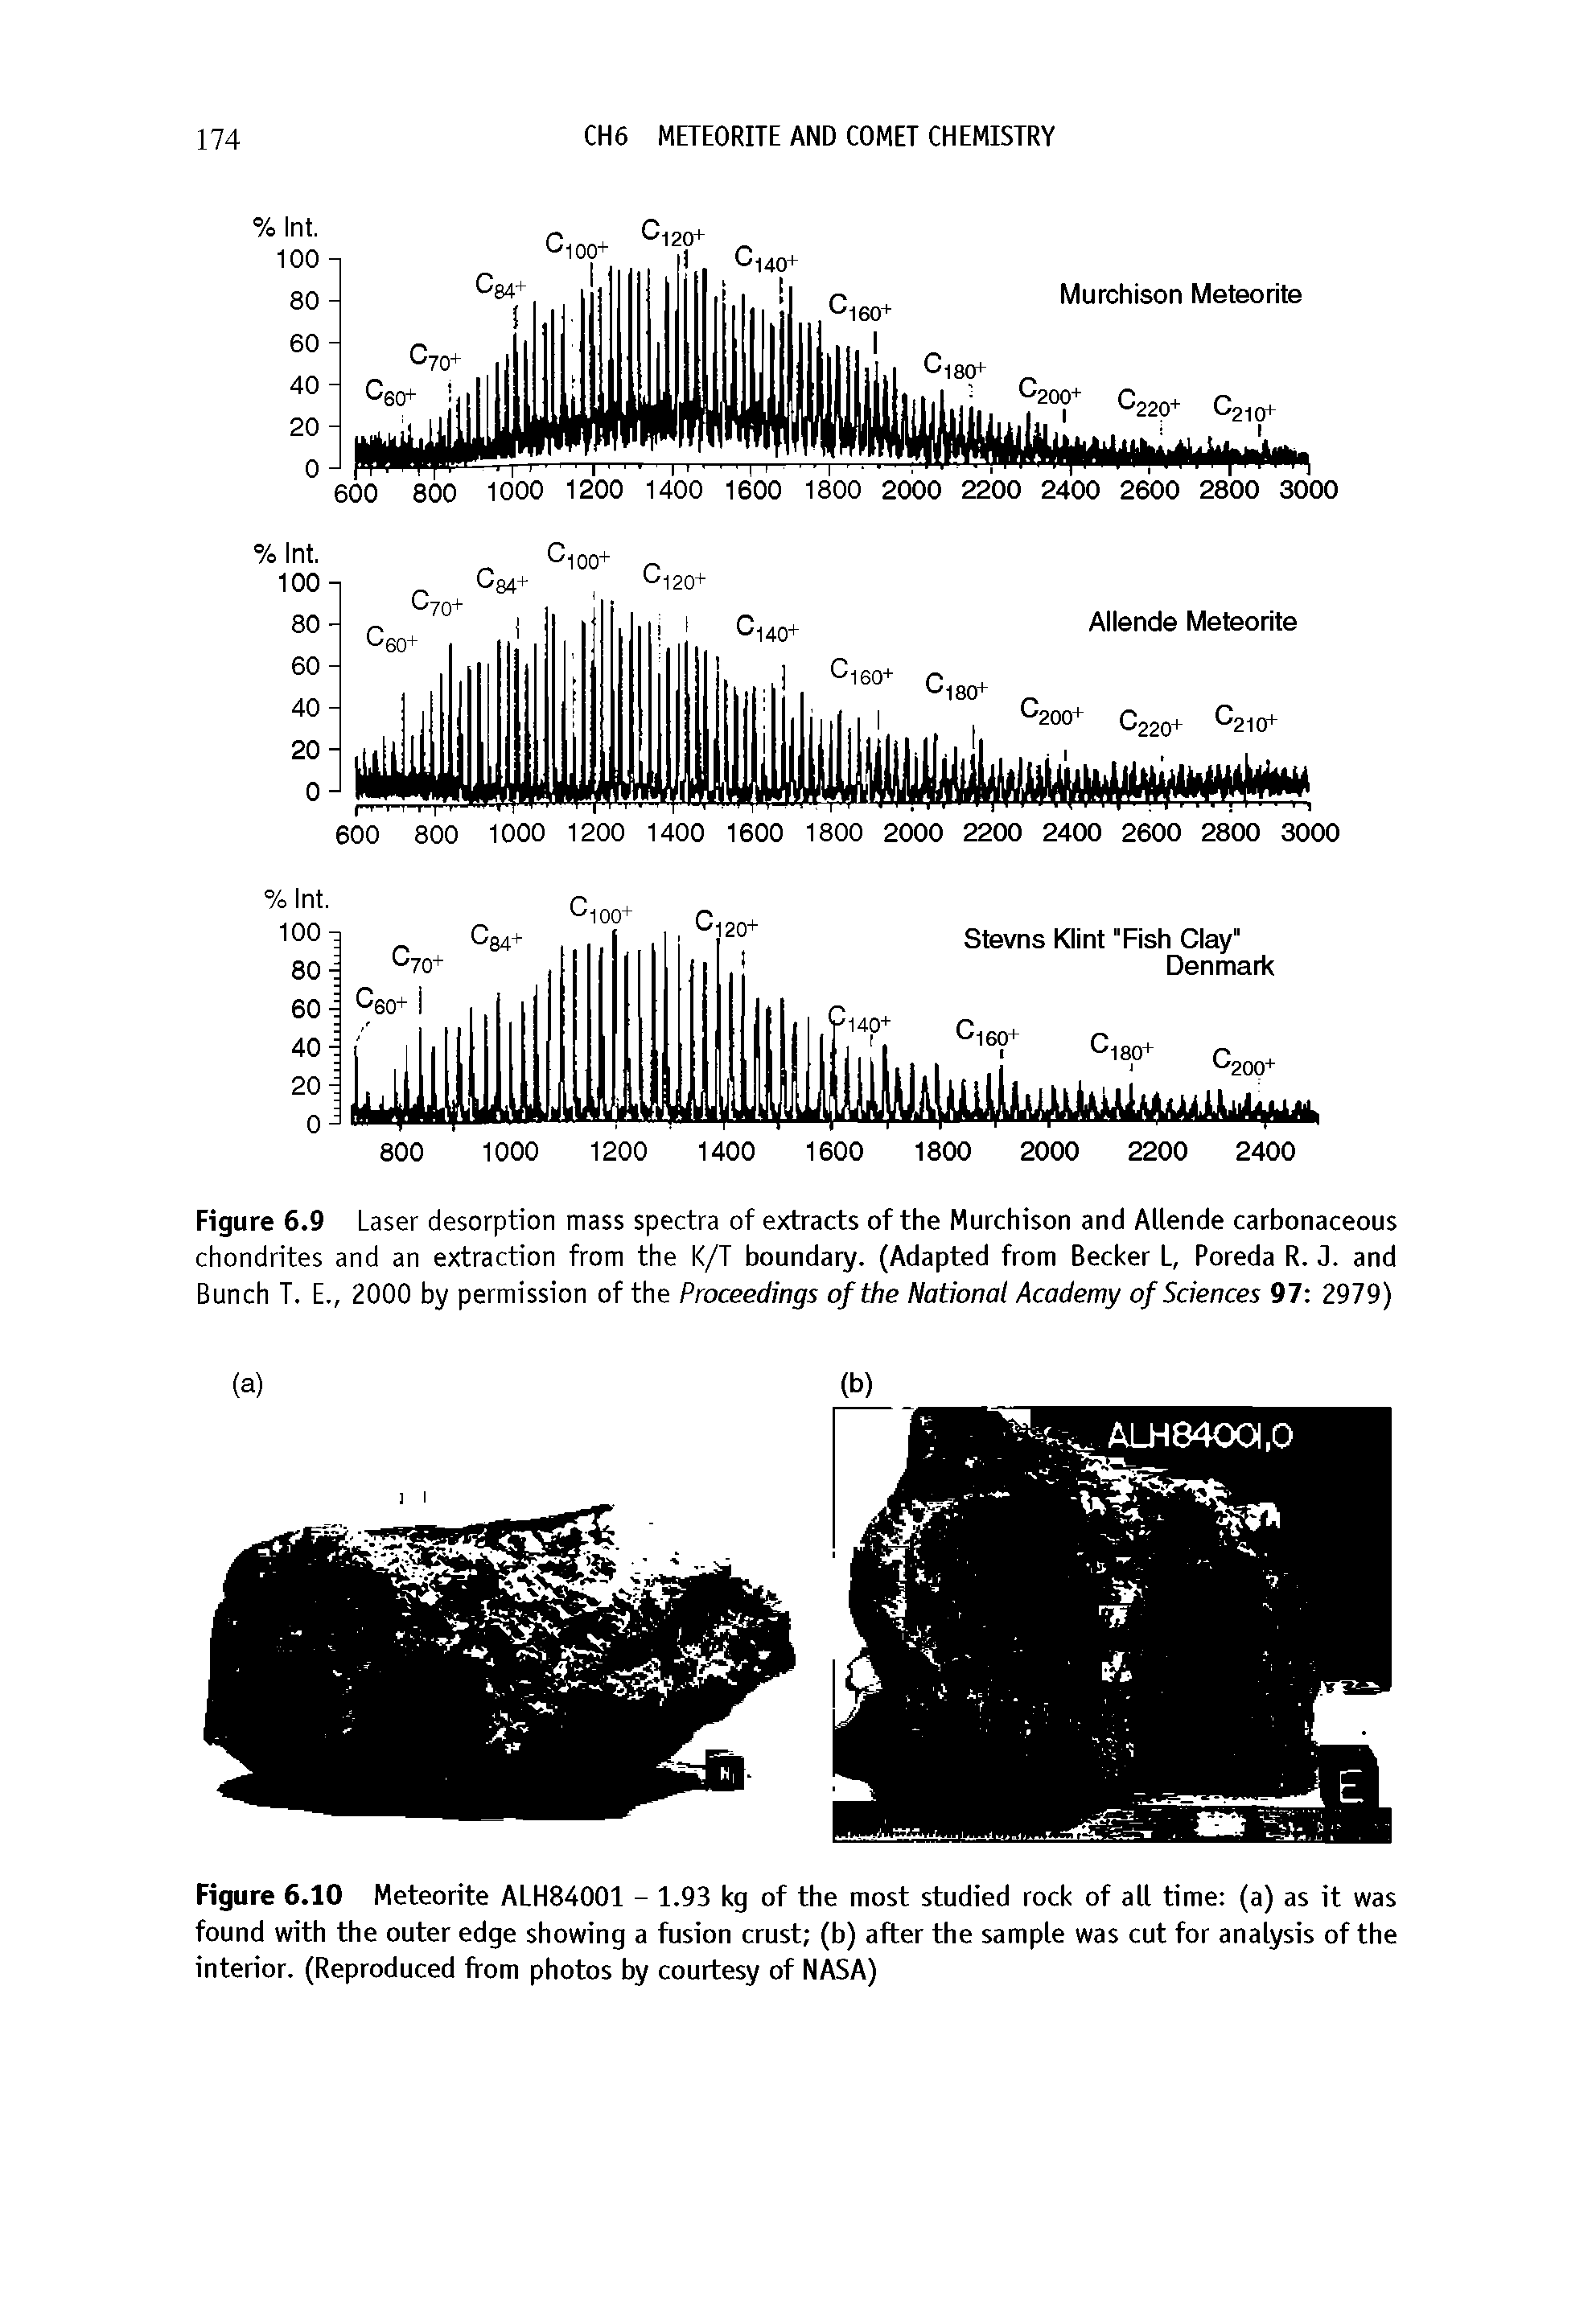 Figure 6.9 Laser desorption mass spectra of extracts of the Murchison and Allende carbonaceous chondrites and an extraction from the K/T boundary. (Adapted from Becker L, Poreda R. J. and Bunch T. E., 2000 by permission of the Proceedings of the National Academy of Sciences 97 2979)...